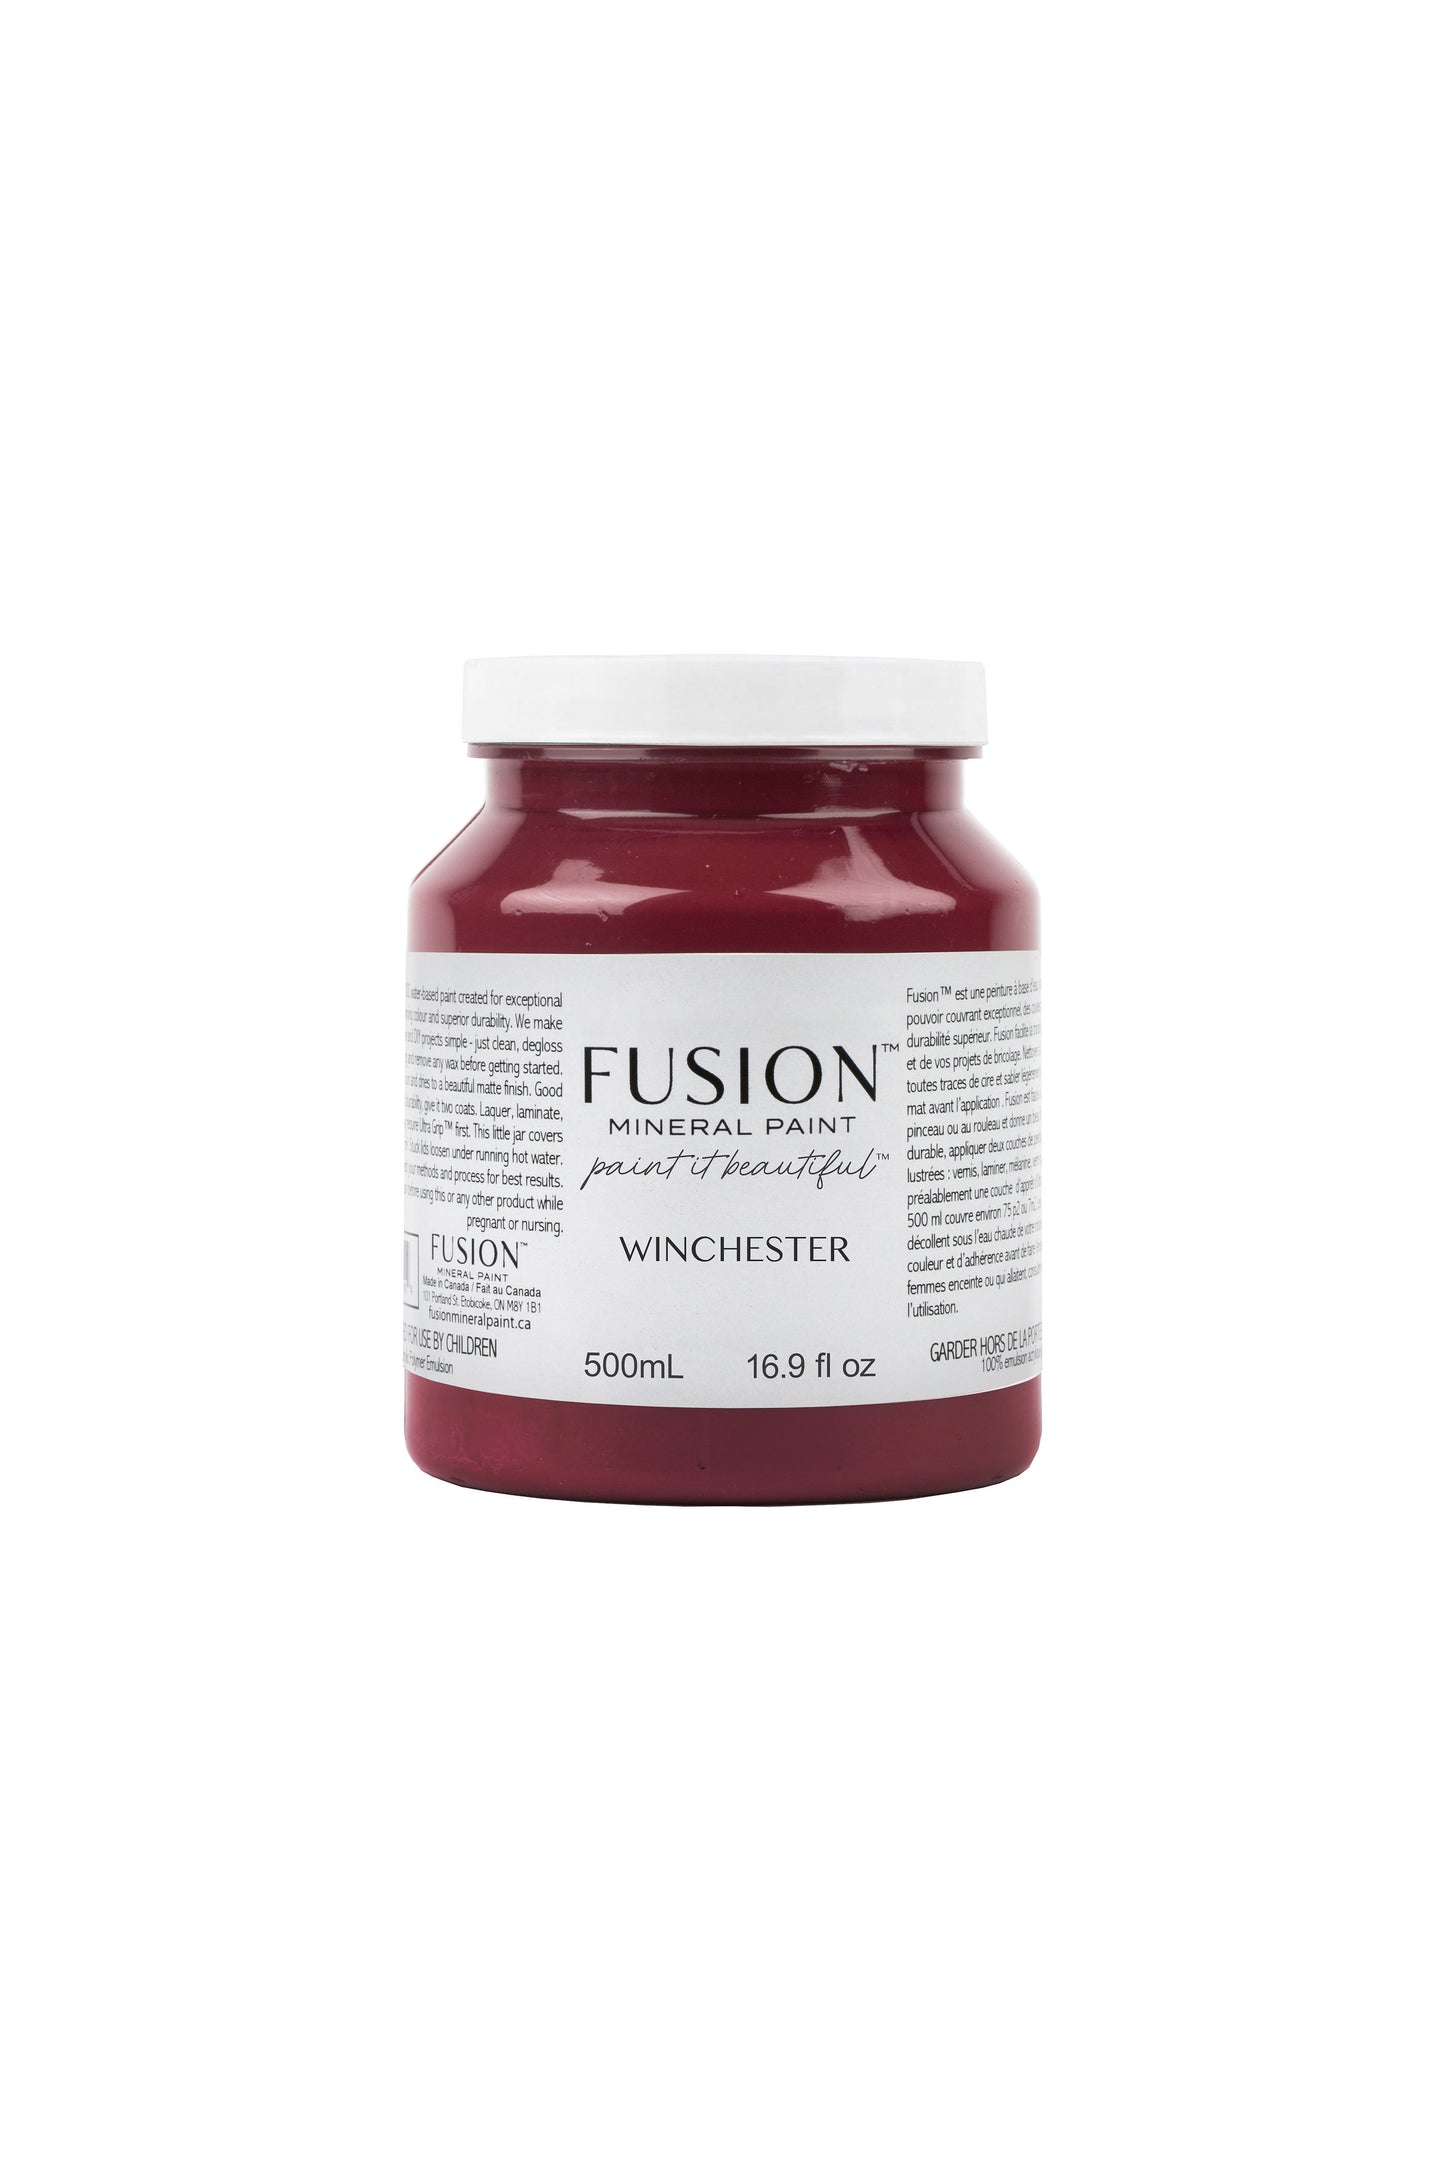 Winchester Fusion Mineral Paint | 500ml Pint Size